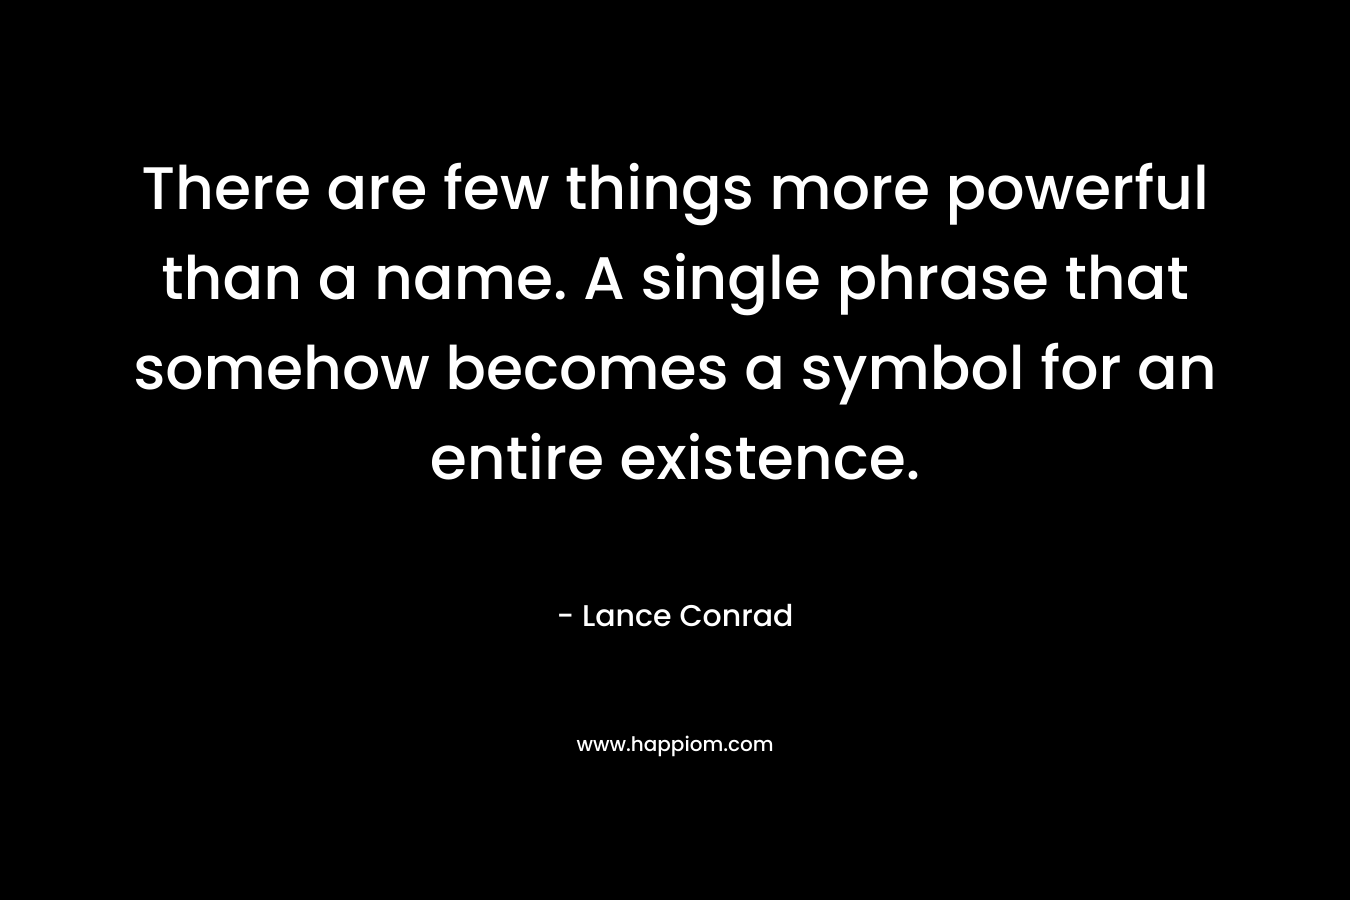 There are few things more powerful than a name. A single phrase that somehow becomes a symbol for an entire existence. – Lance Conrad